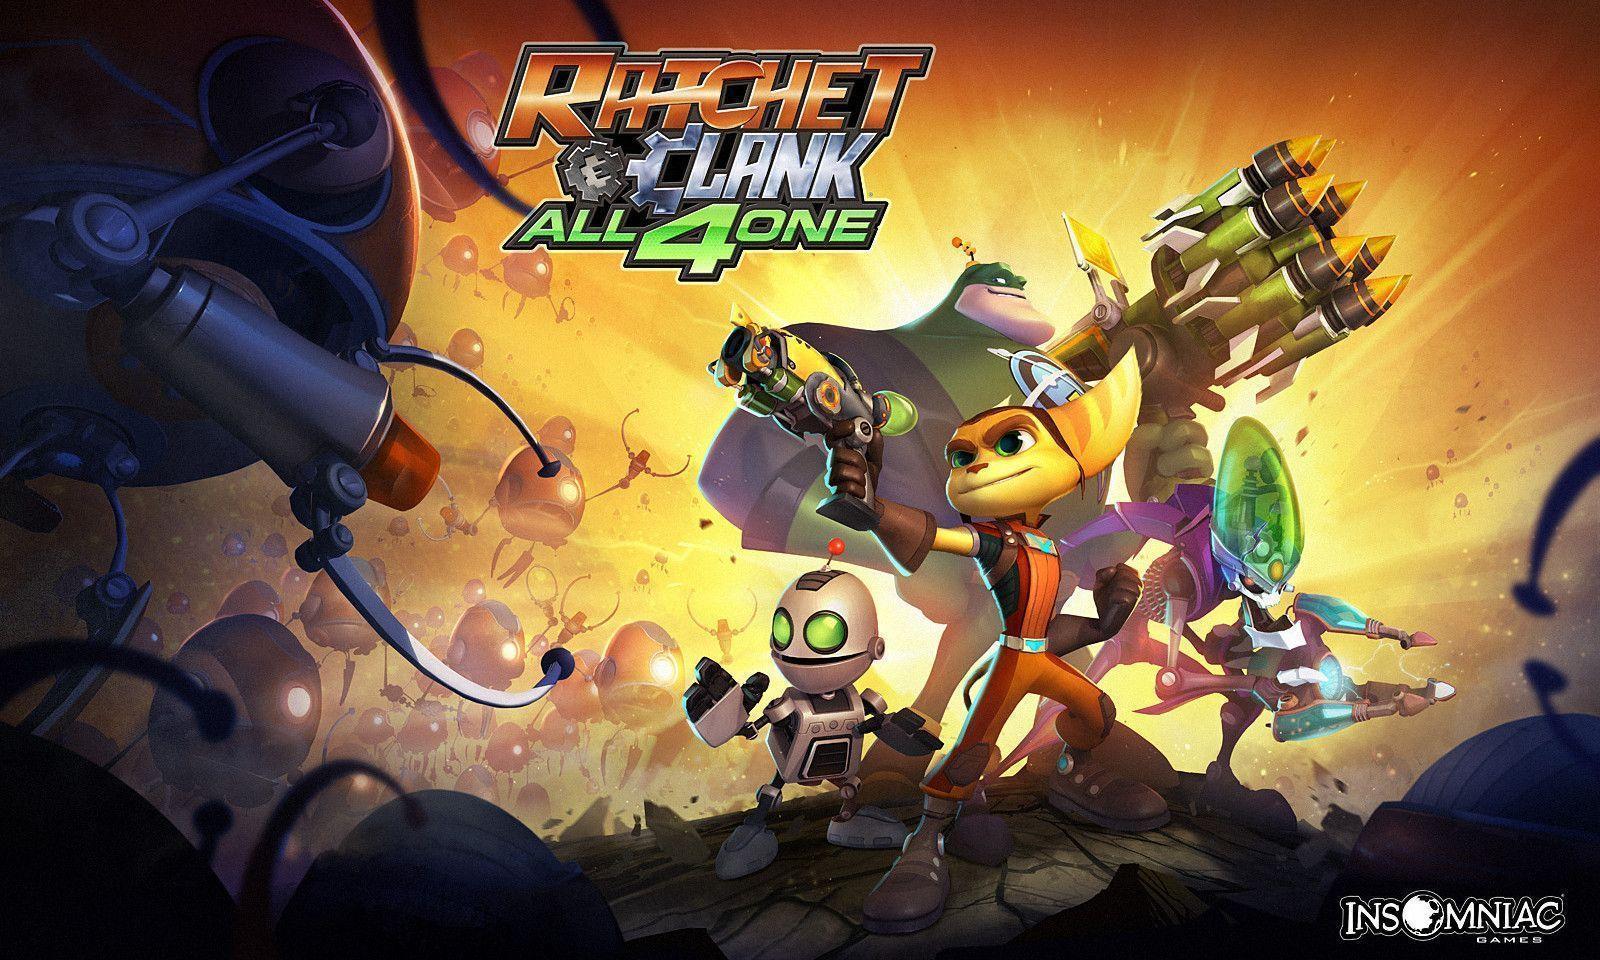 Wallpaper from Ratchet & Clank, All 4 One Galaxy